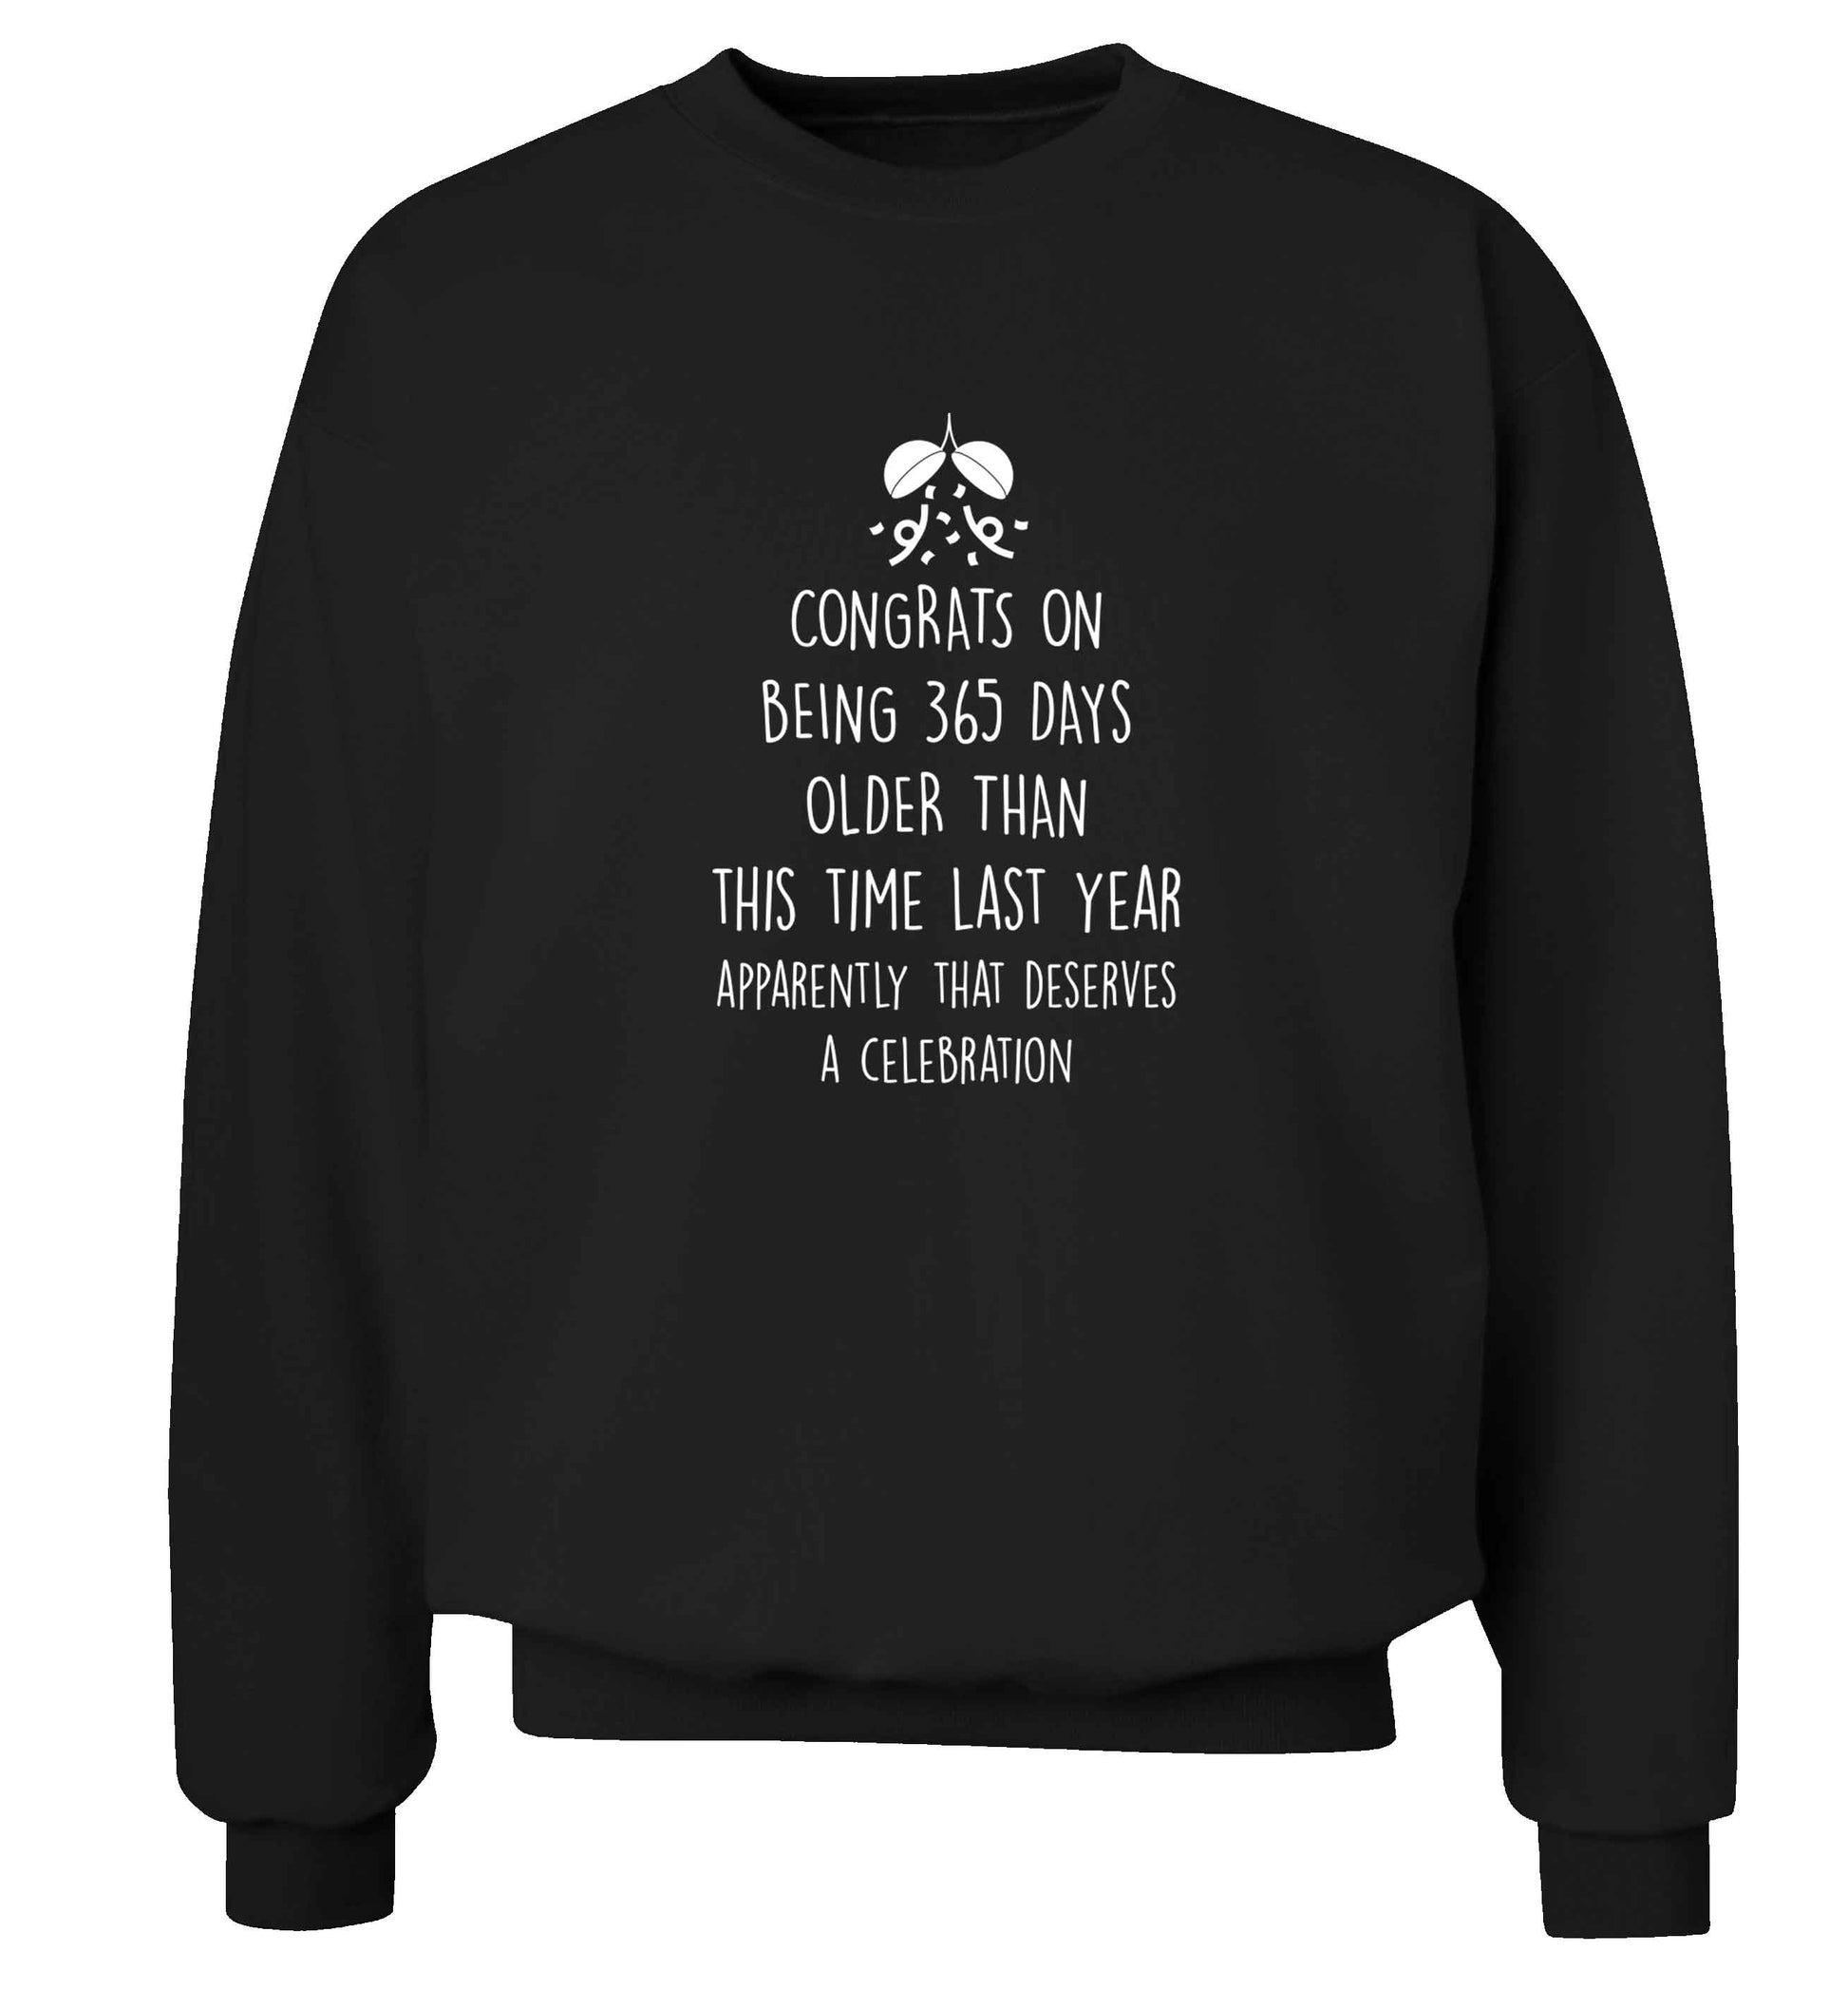 Congrats on being 365 days older than you were this time last year apparently that deserves a celebration adult's unisex black sweater 2XL